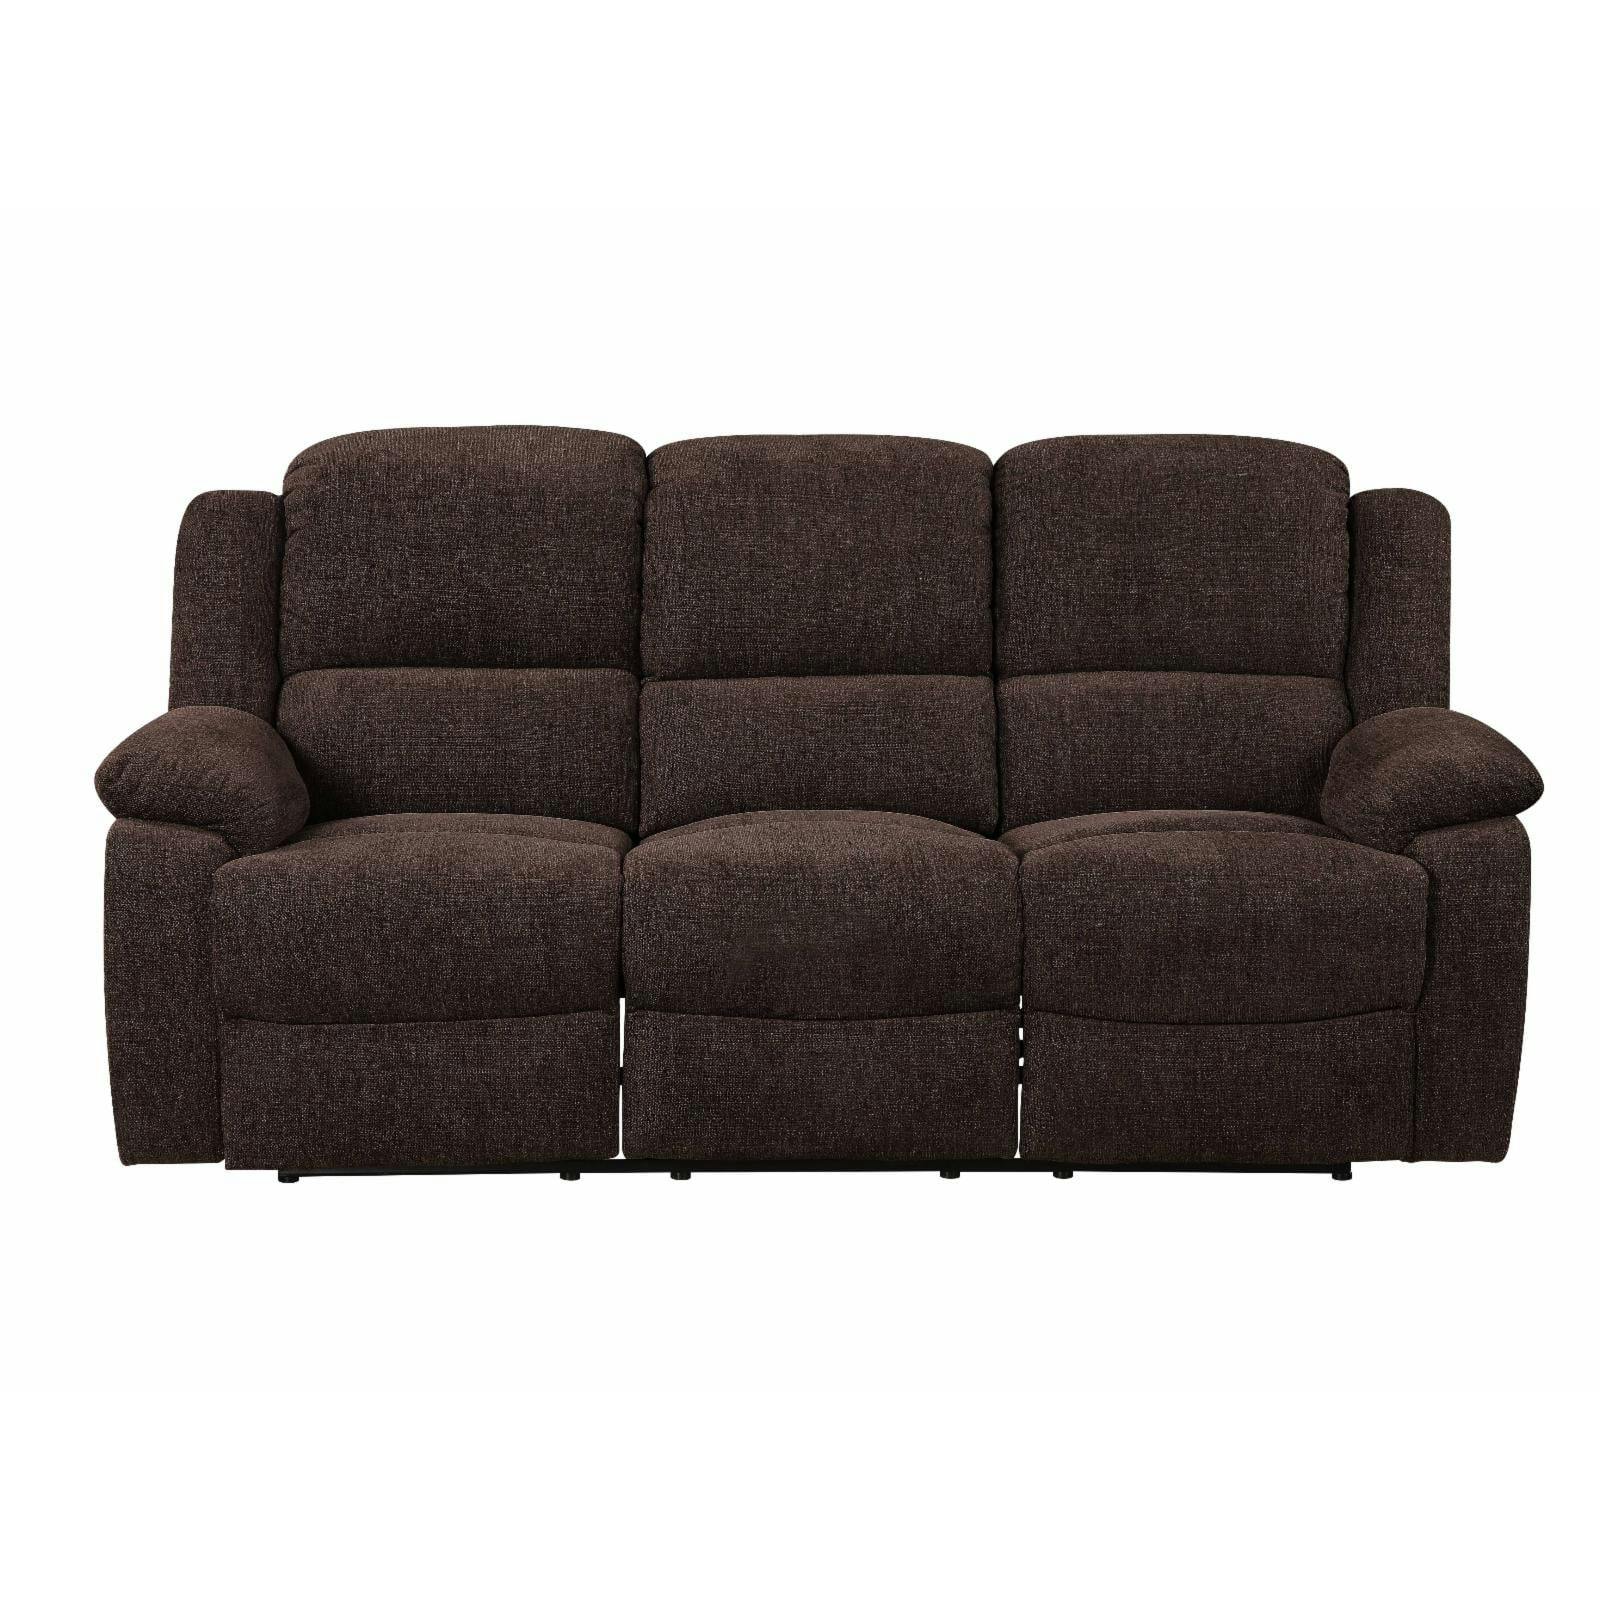 Kalen 78'' Velvety Brown Chenille Reclining Sofa with Cup Holders